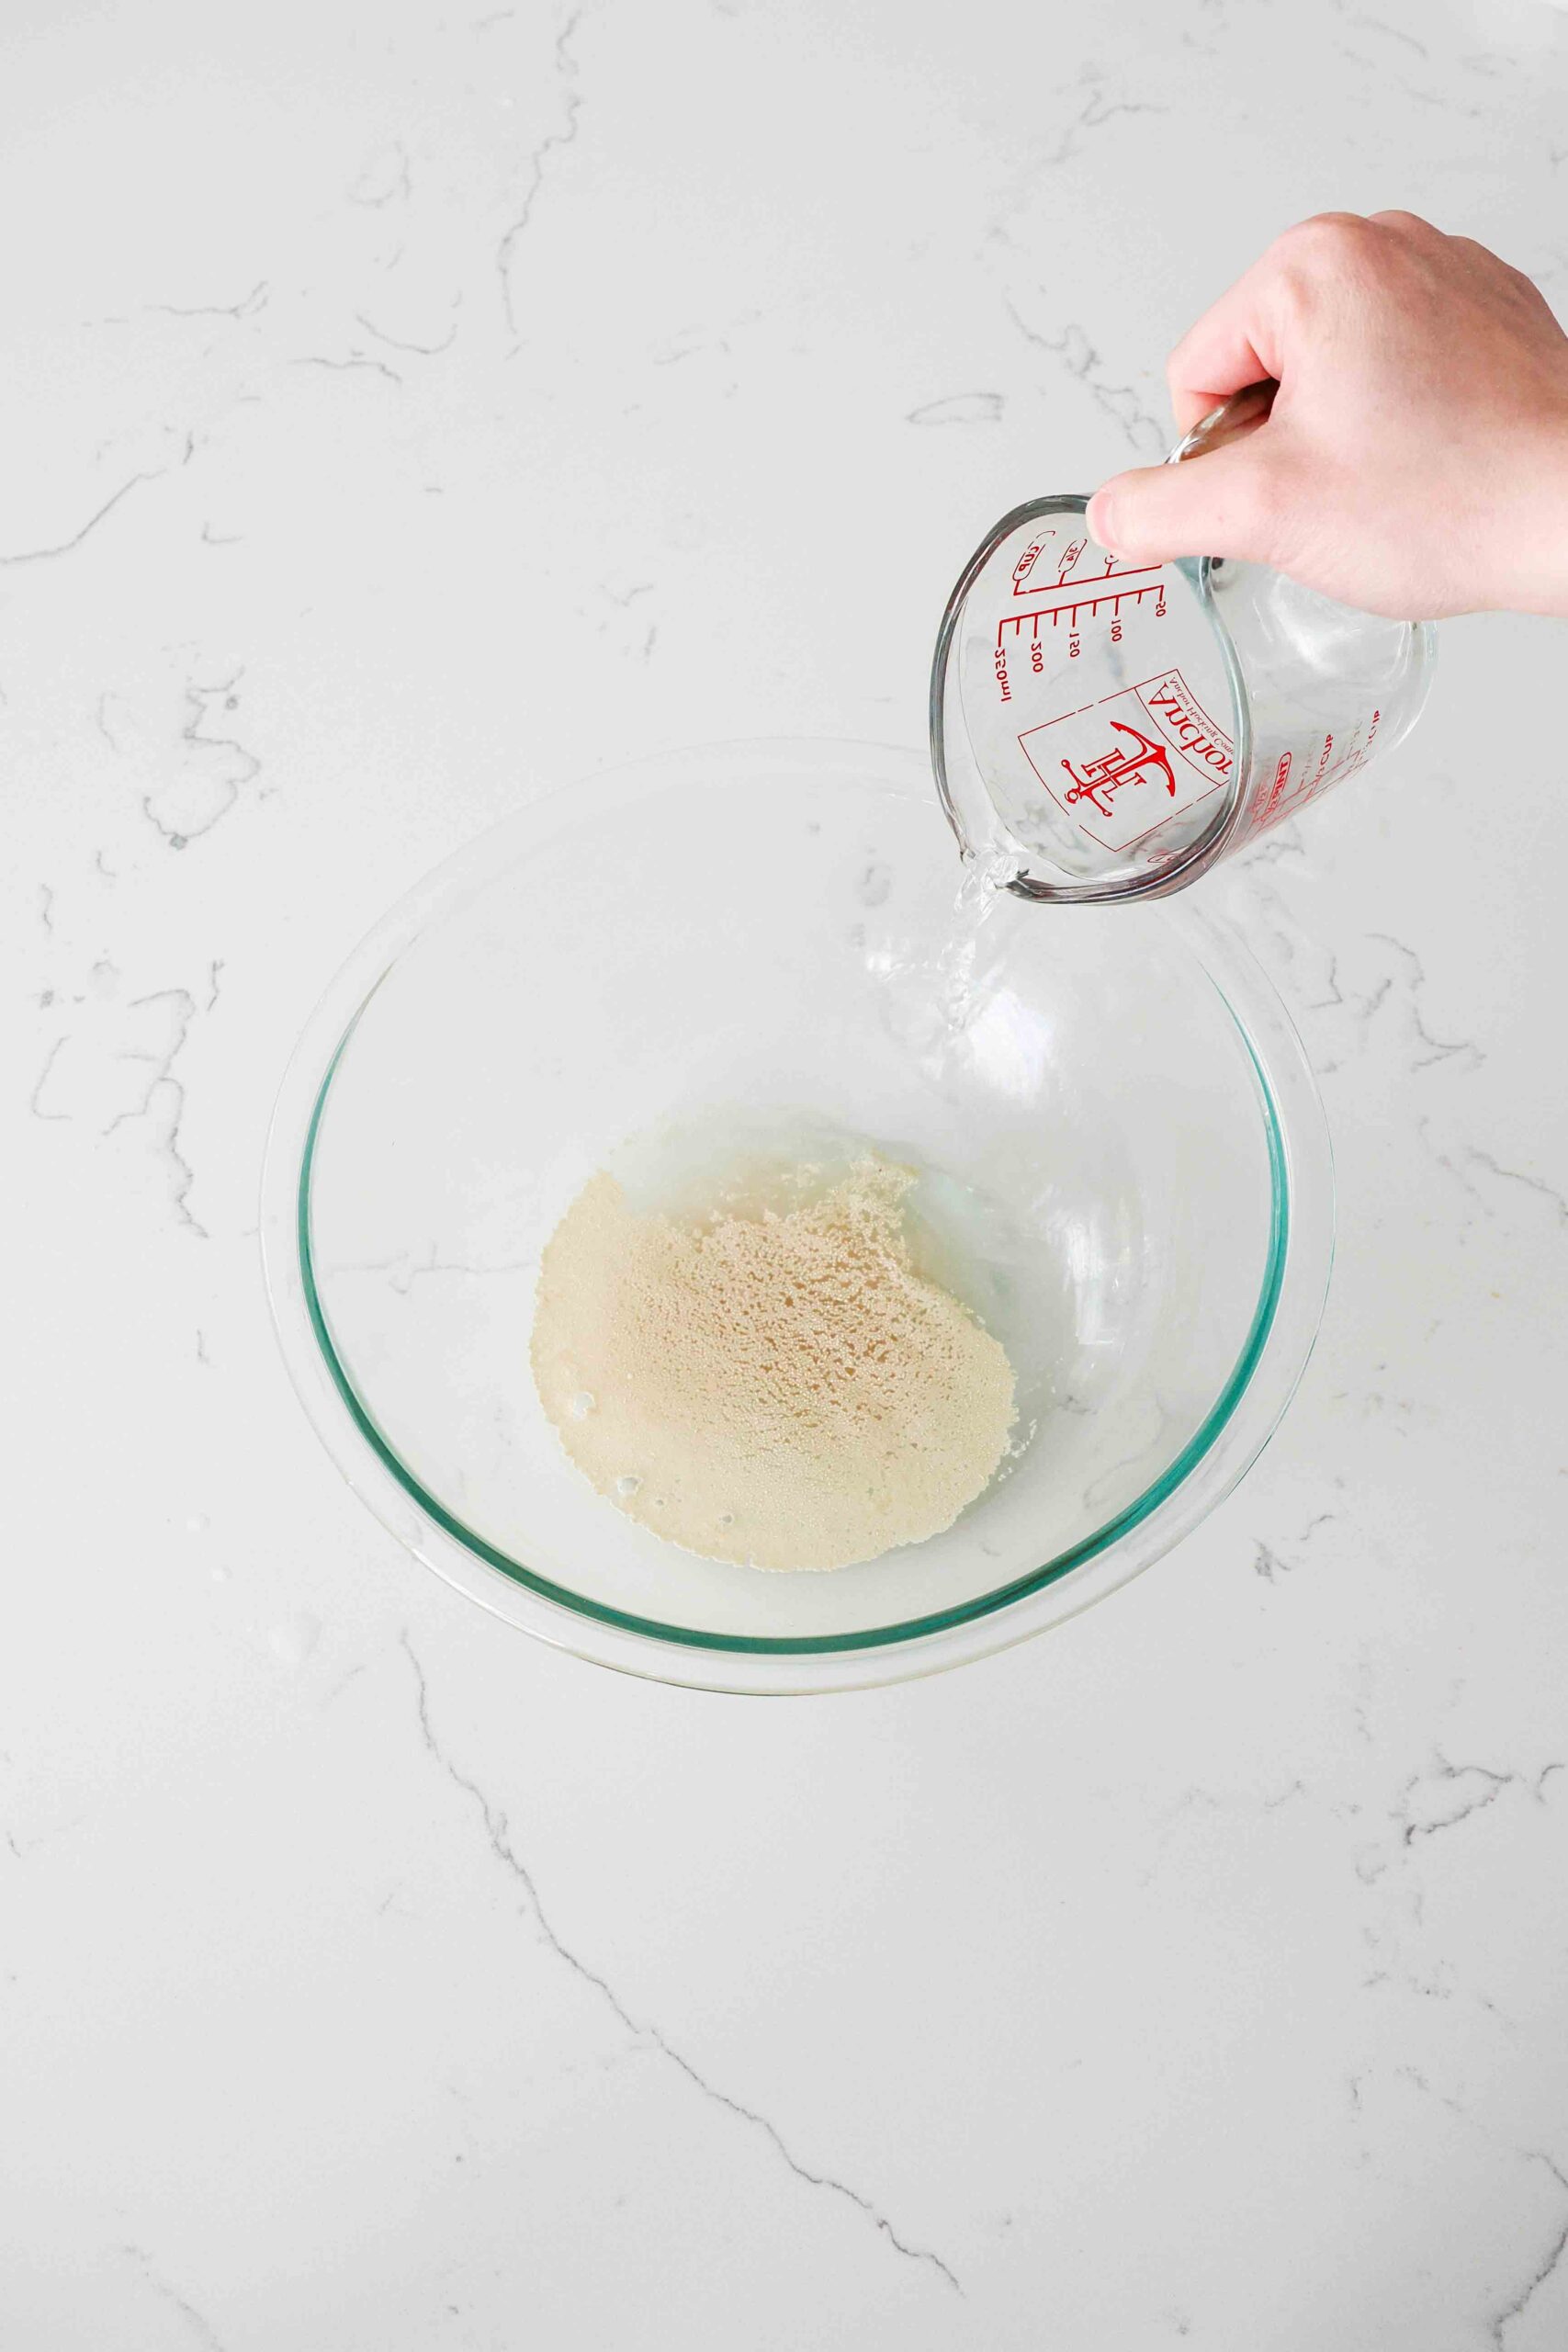 A hand pours warm water from a measuring cup over yeast in a glass mixing bowl.